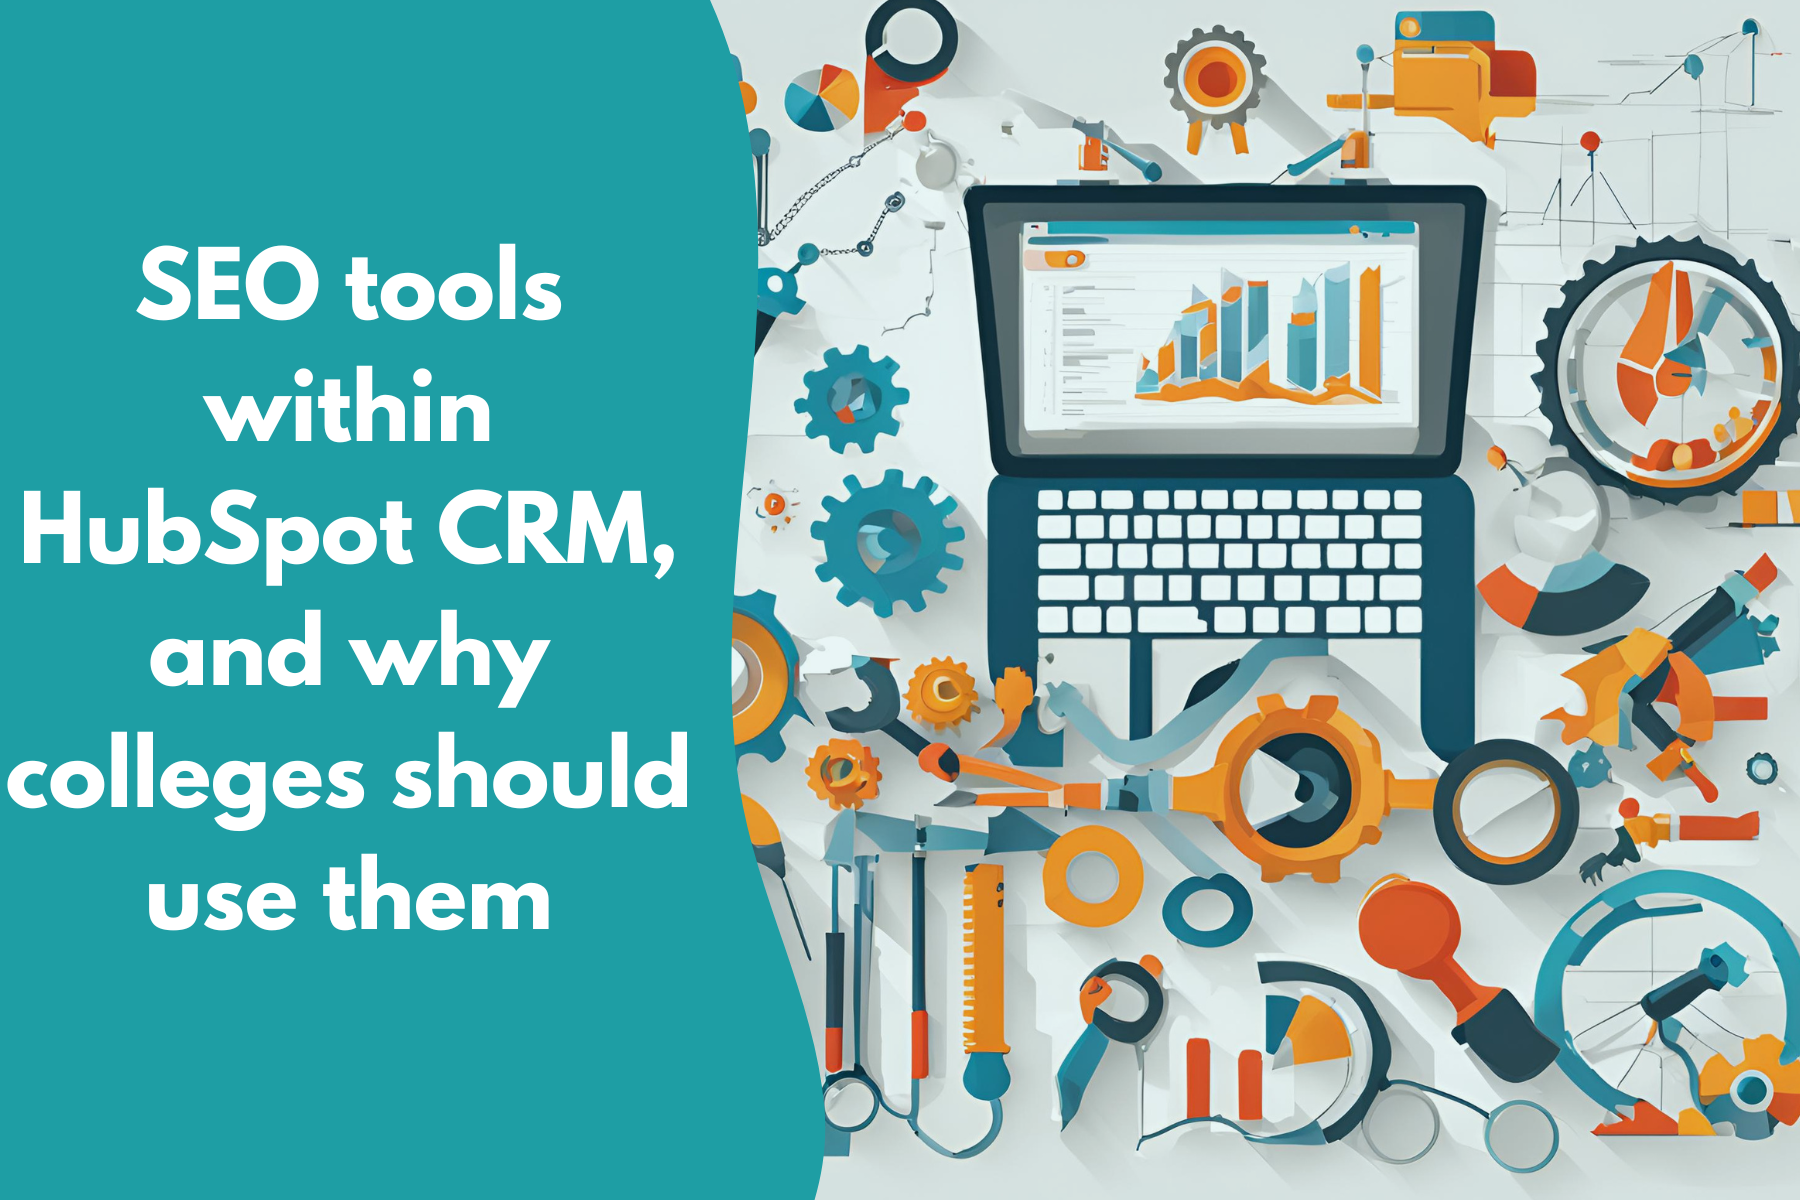 SEO tools within HubSpot CRM, and why colleges should use them